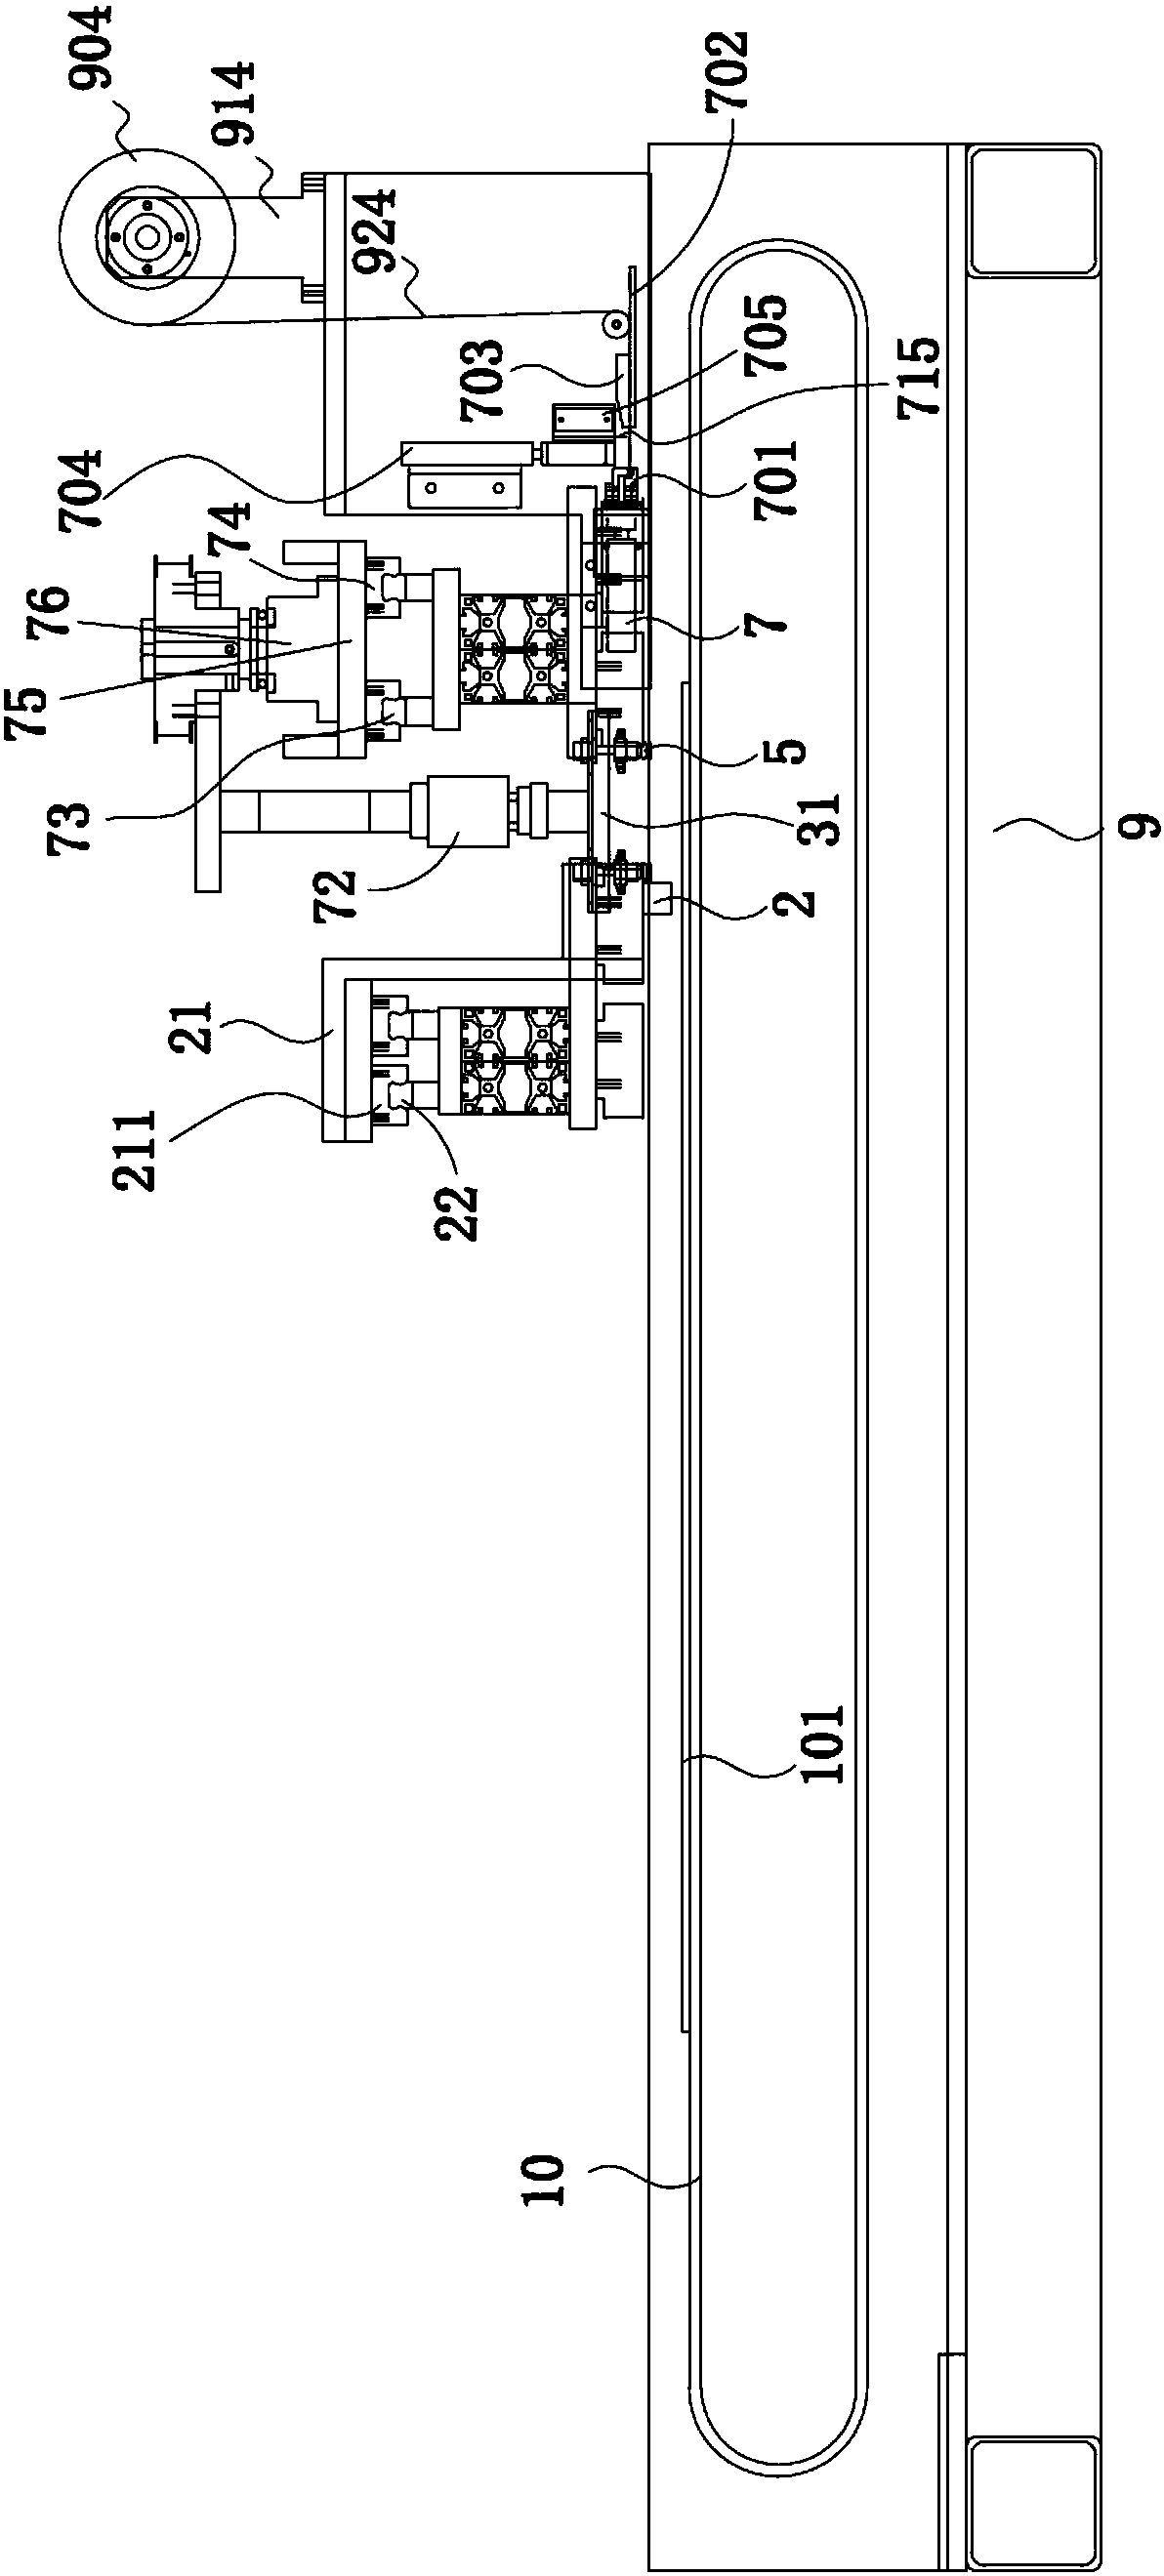 Solar cell layout adhesive tape pasting device